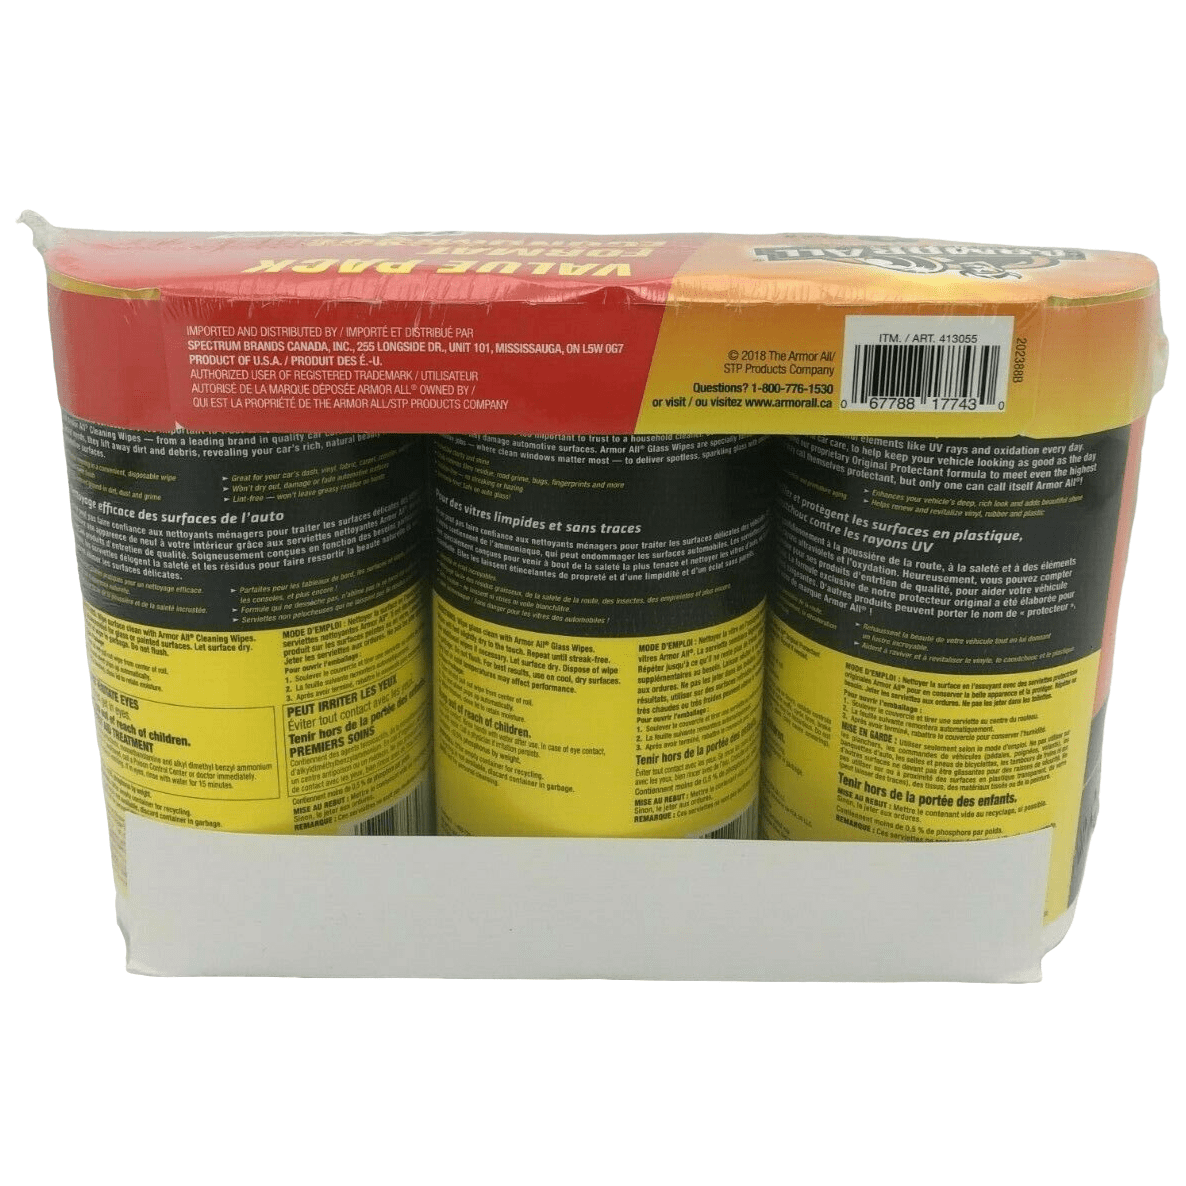 Armor All Car Detailing Value Pack / 50 Wipes per / Cleaning, Glass, and Protectant Wipes